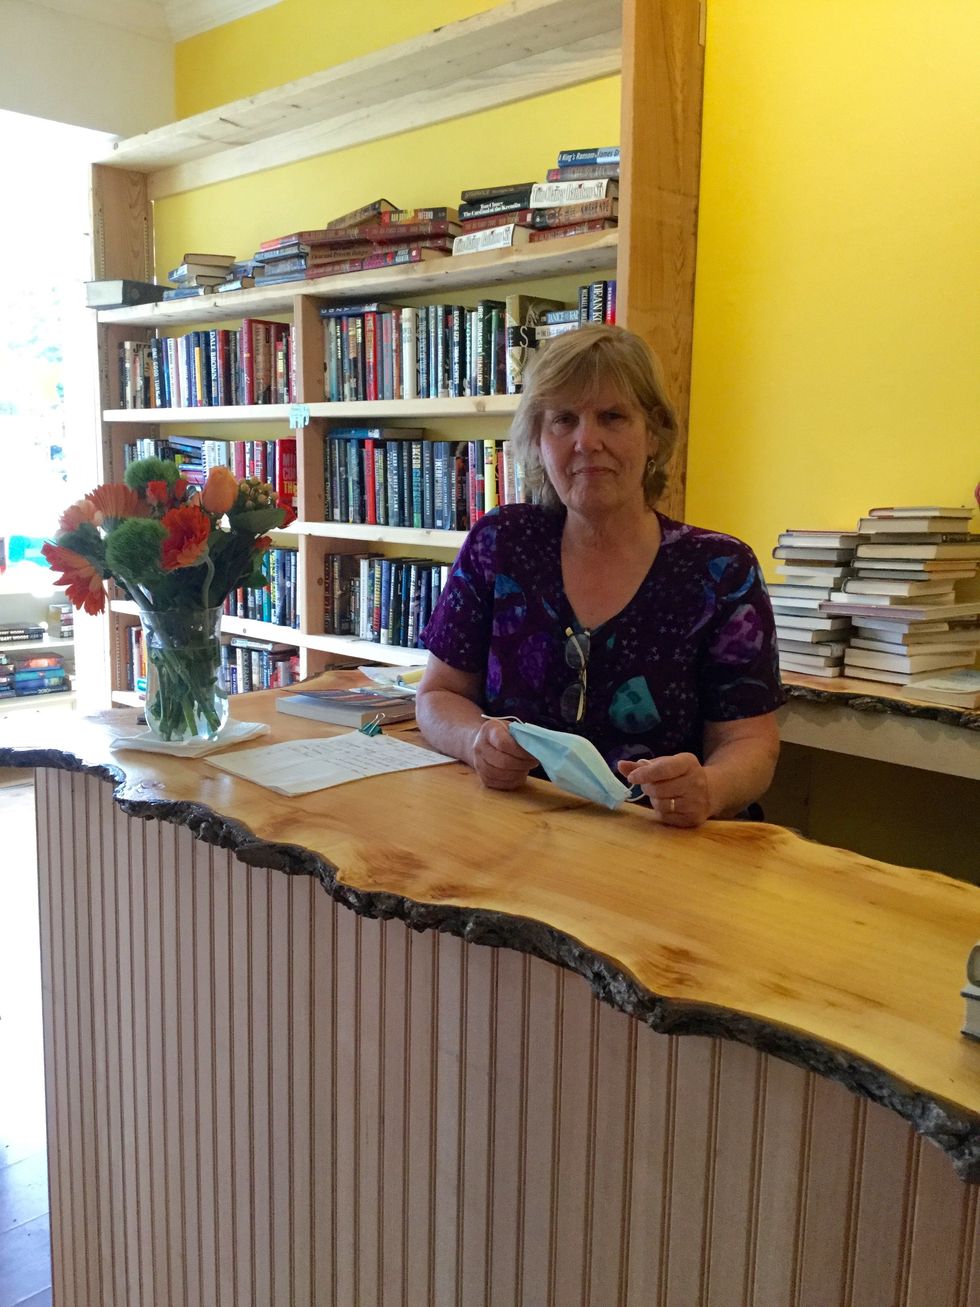 Castoff books find second life at Yellow Submarine Used Books